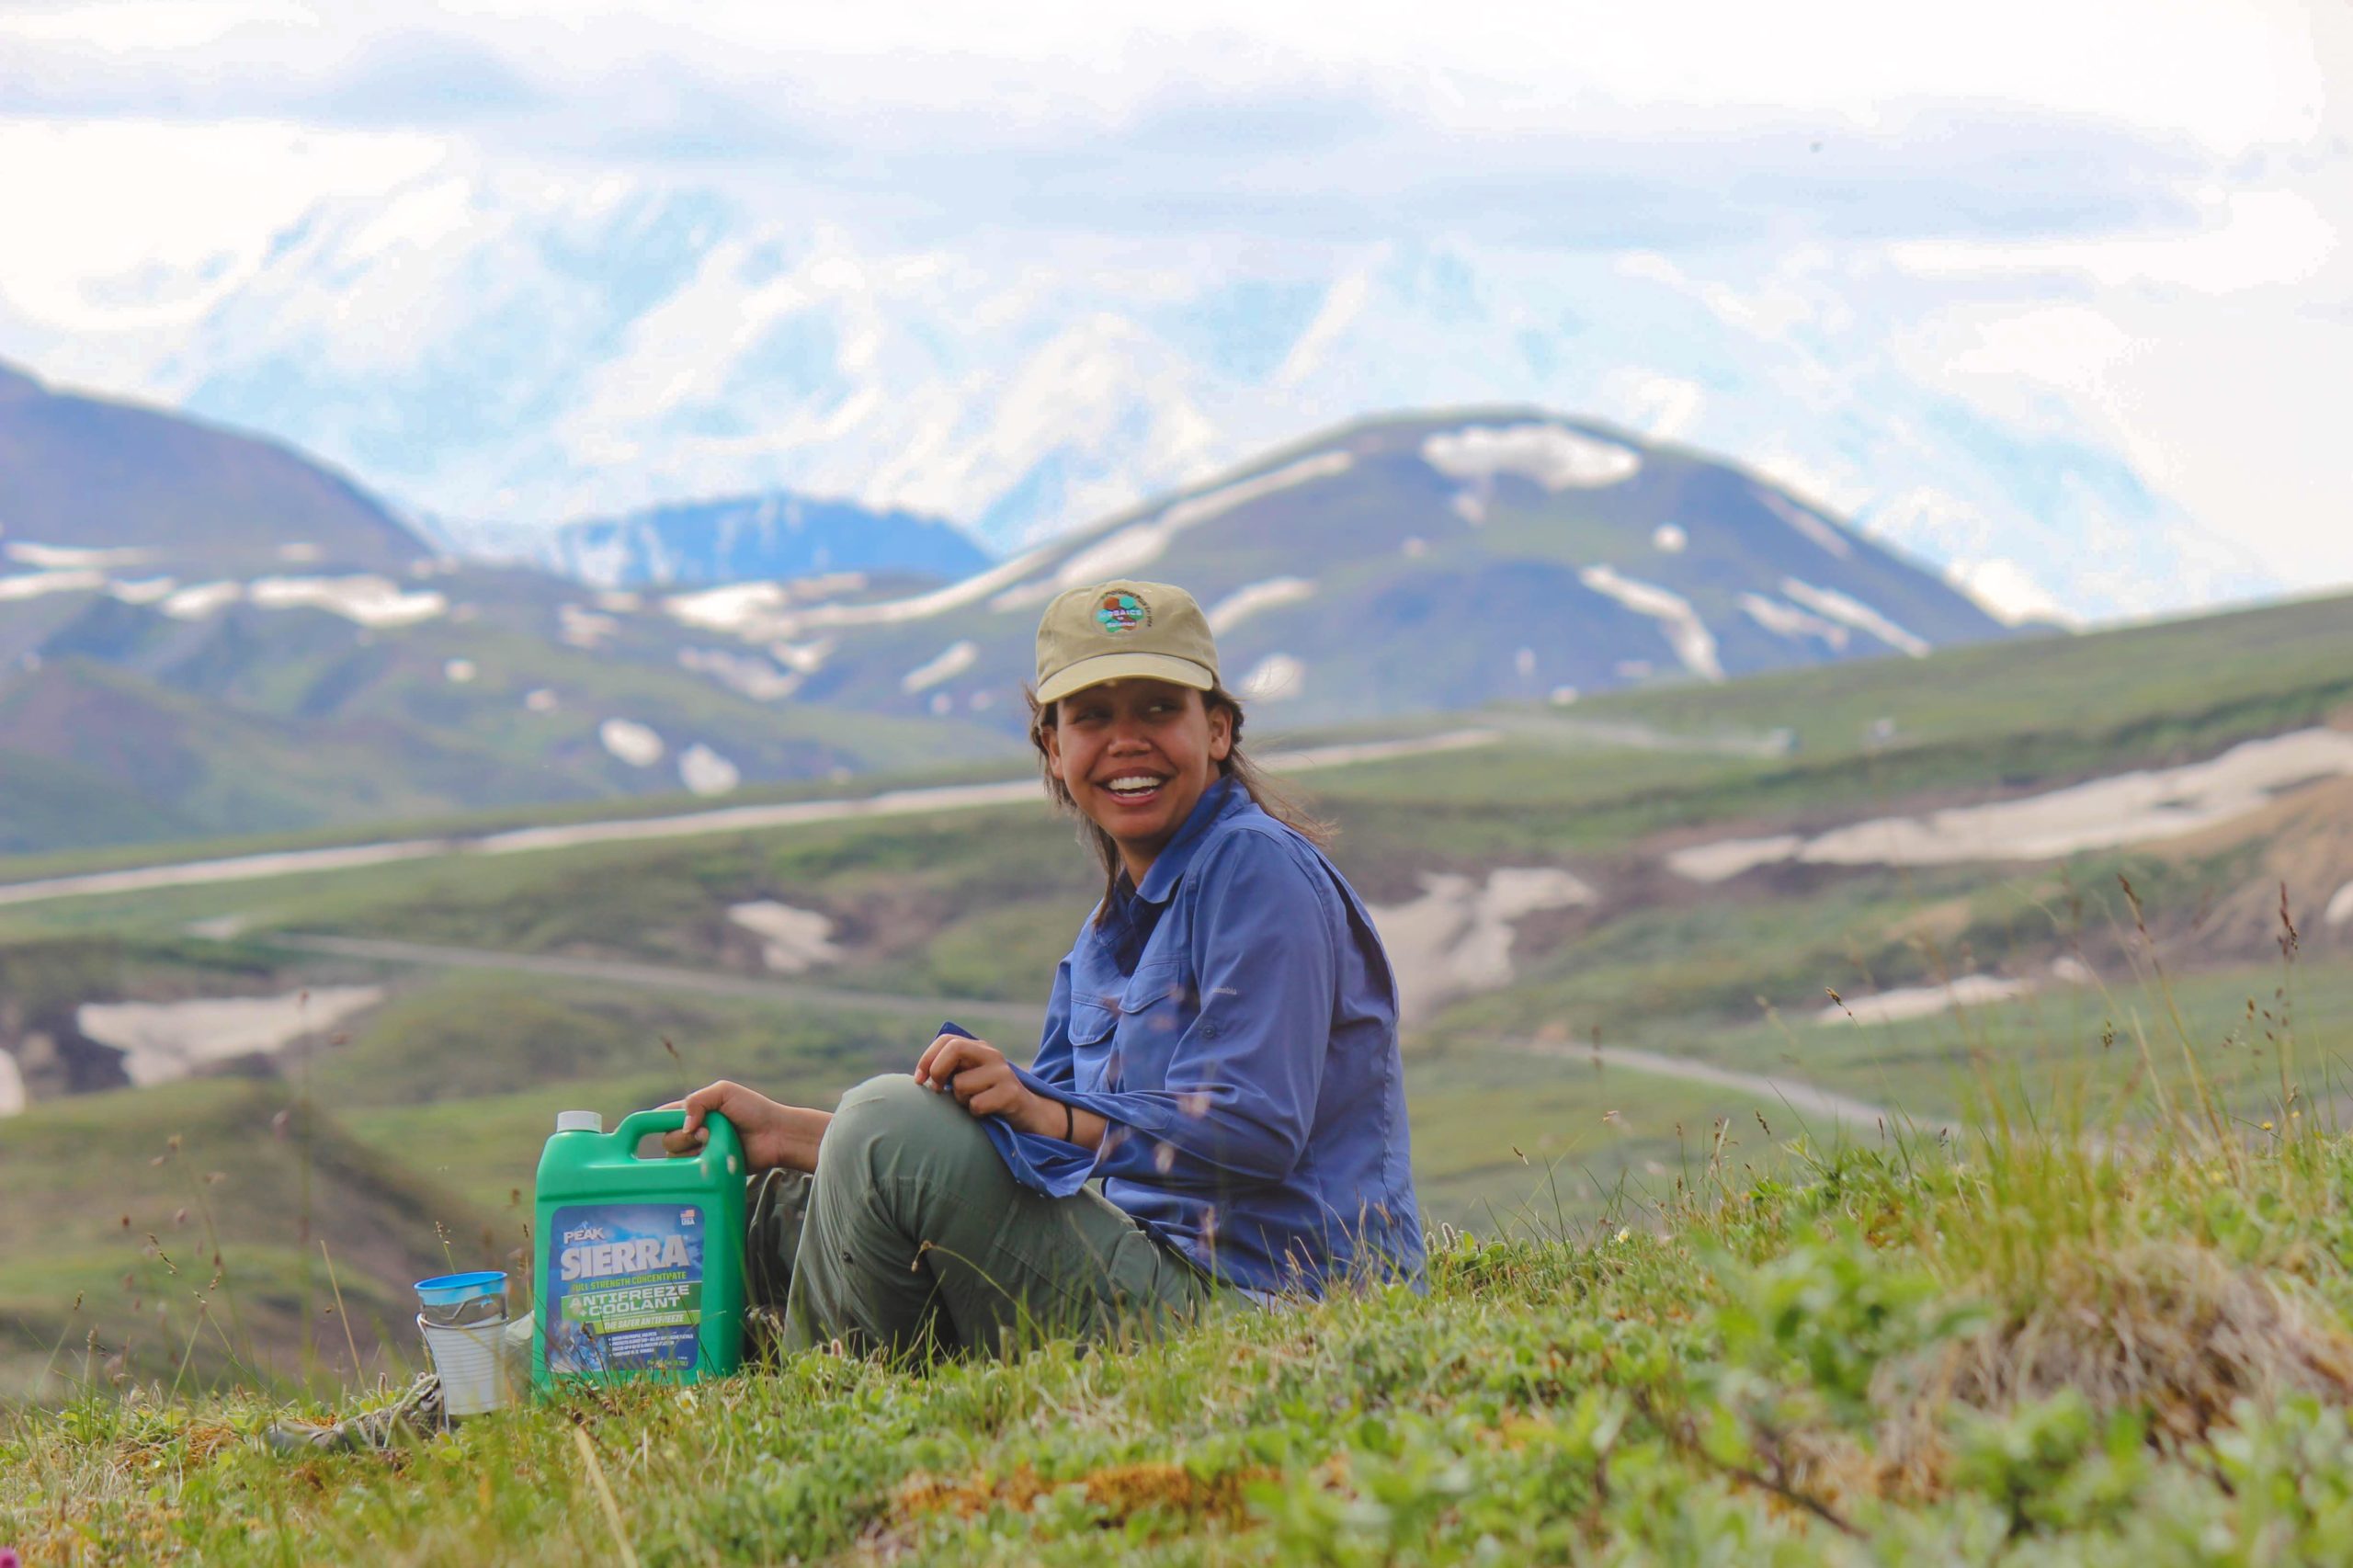 A GYF intern smiles while sitting in a field and holding a bottle of anti-freeze. Snowcapped peaks rise into a cloudy sky behind her.